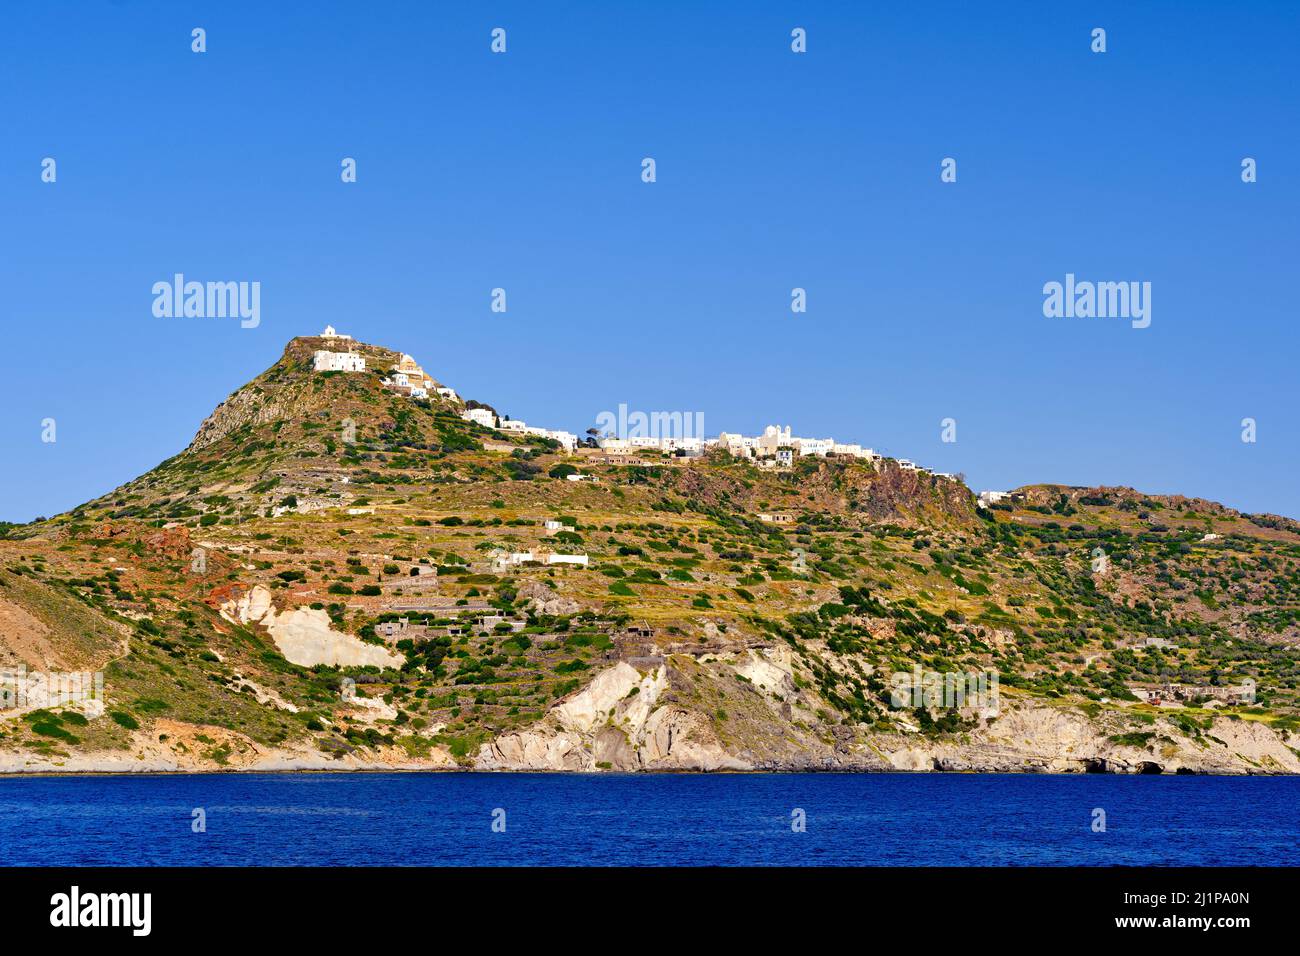 Beautiful view of Mediterranean island. Whitewashed houses atop of high hills, terraced slopes, winding roads, white Orthodox church dominate skyline Stock Photo